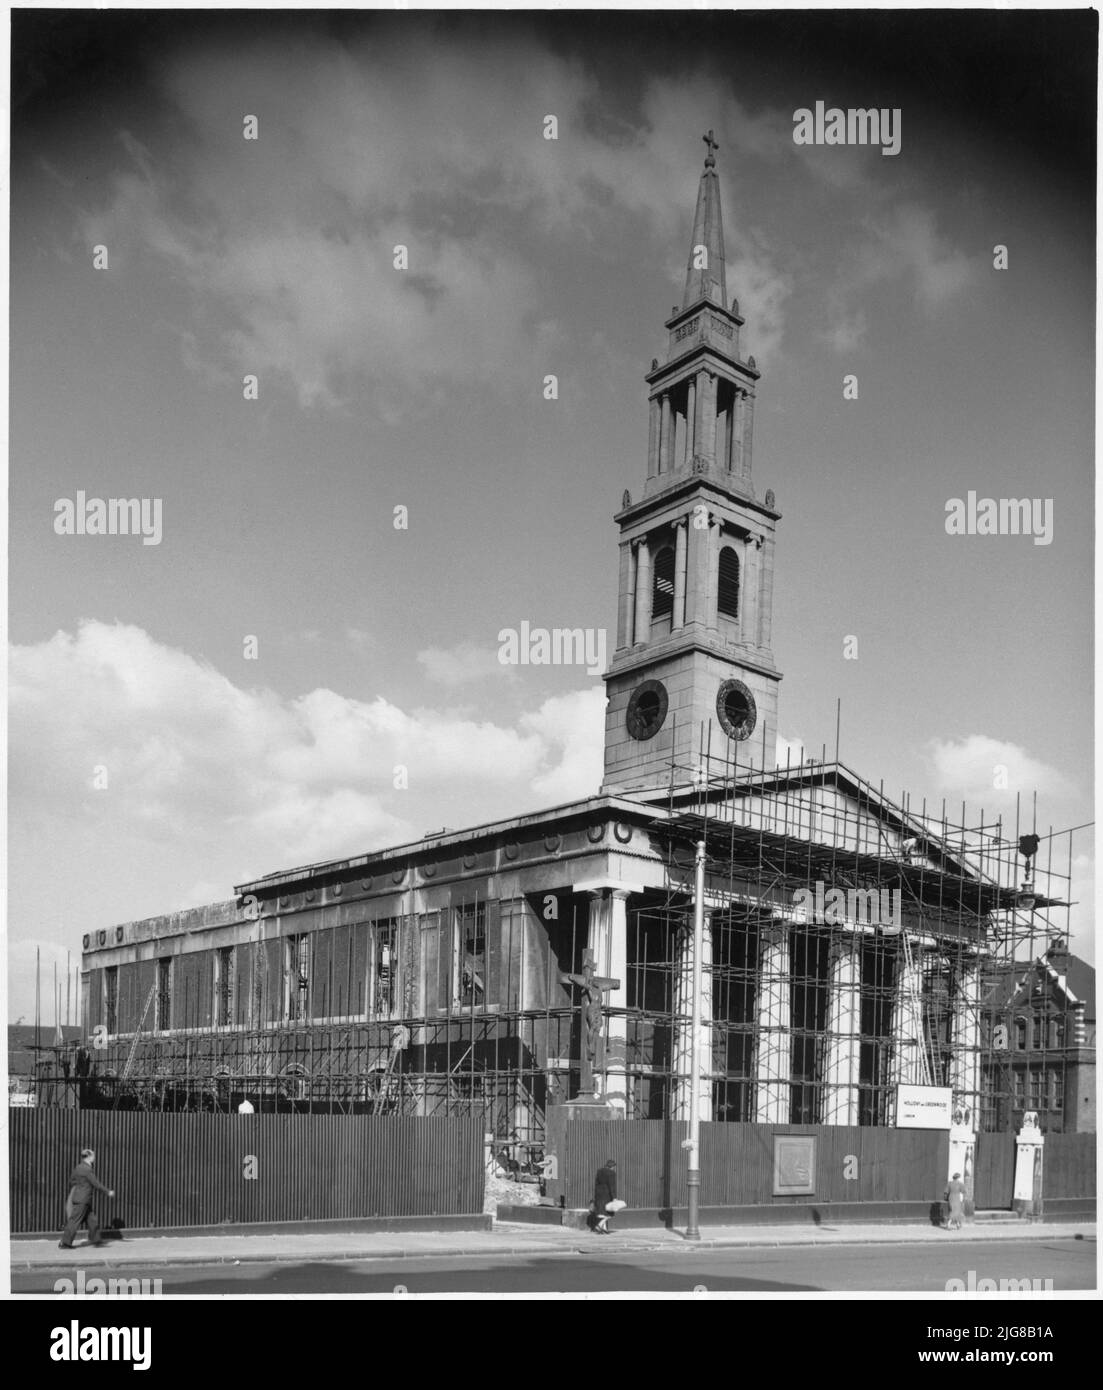 St John's Church, Waterloo Road, Lambeth, Greater London Authority, 21-06-1950. Exterior view from the north-west of St John's Church, showing the building surrounded by scaffolding during rebuilding following bomb damage during the Second World War. The original caption reads: &quot;Rebuilding of St. John's Church, Waterloo Road.&quot; St John's Church was originally built in 1823-4 to designs by the architect Francis Bedford. It was one of four churches built in Lambeth in the Greek Revival style. The church was damaged by bombs during the Second World War. It was later restored and designat Stock Photo